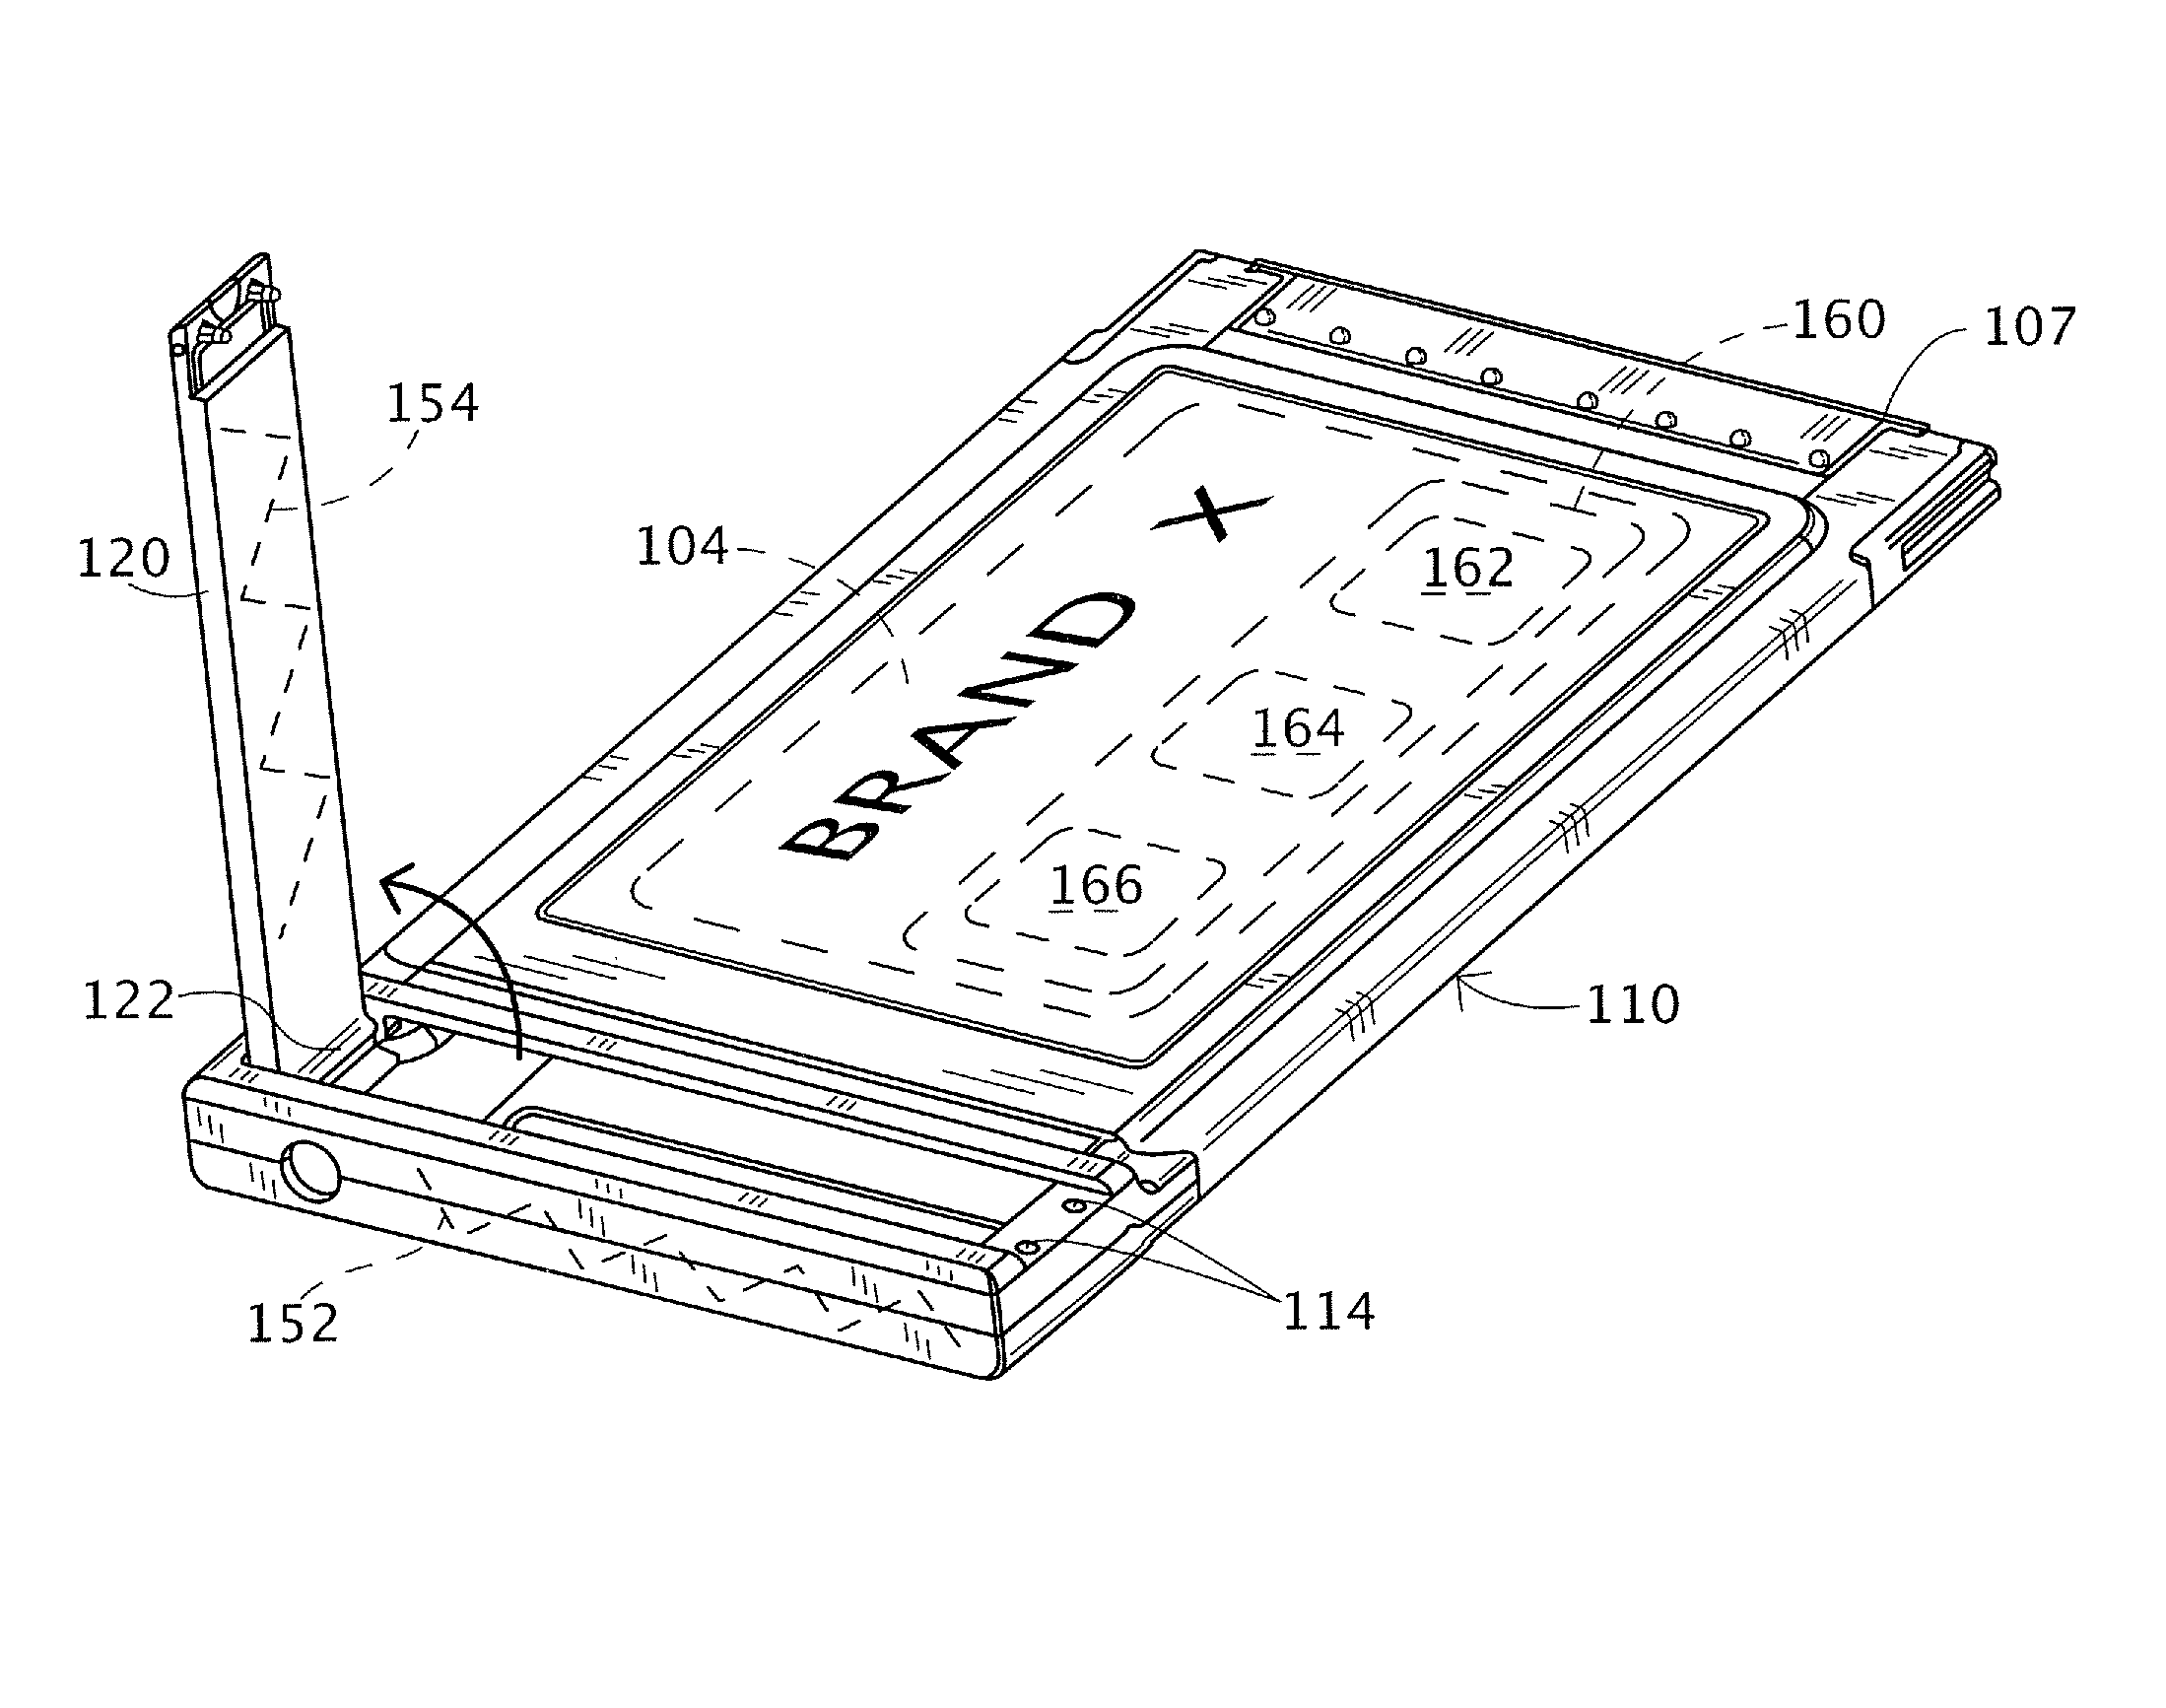 Mobile wireless communications terminals and wireless communications cards for use with an electronic device